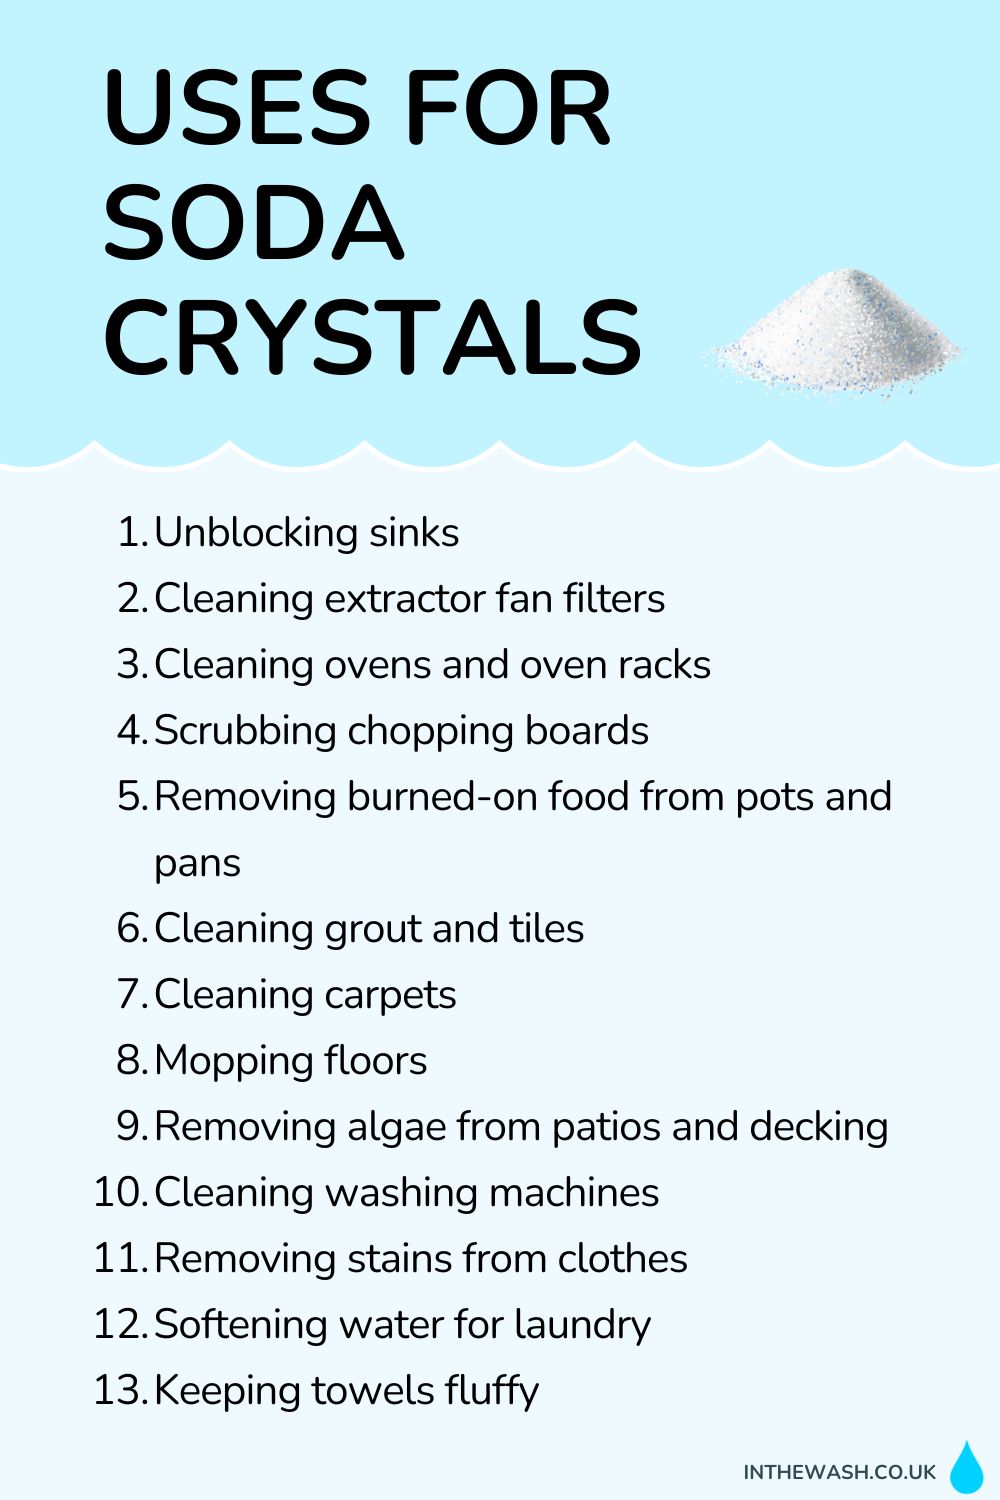 Uses for soda crystals